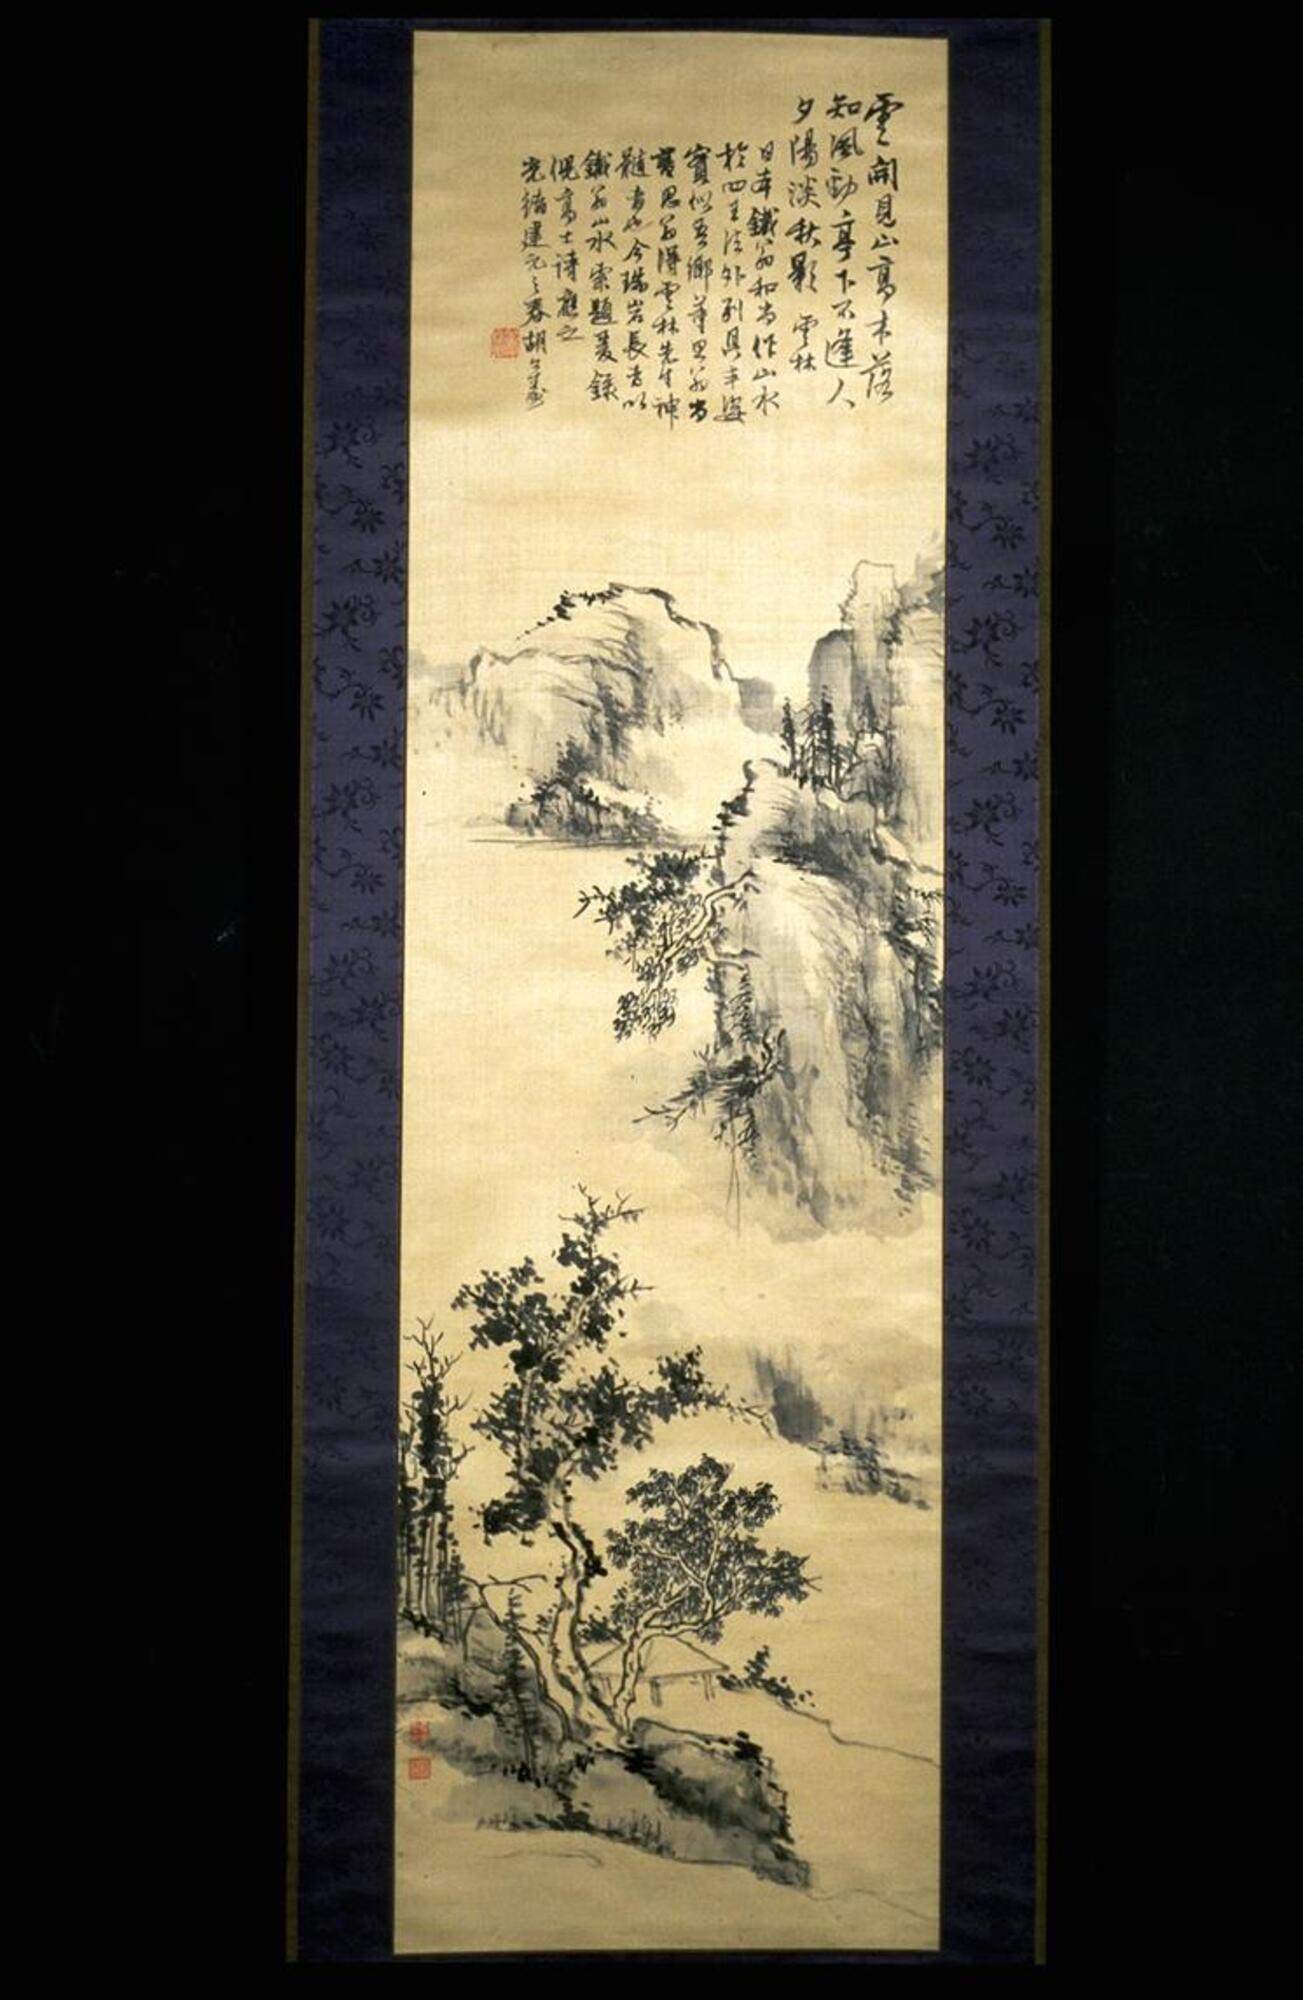 There is a mountainous&nbsp;landscape with trees scattered around and mist in the air. At the top of the hanging scroll, there is an inscription and a seal.